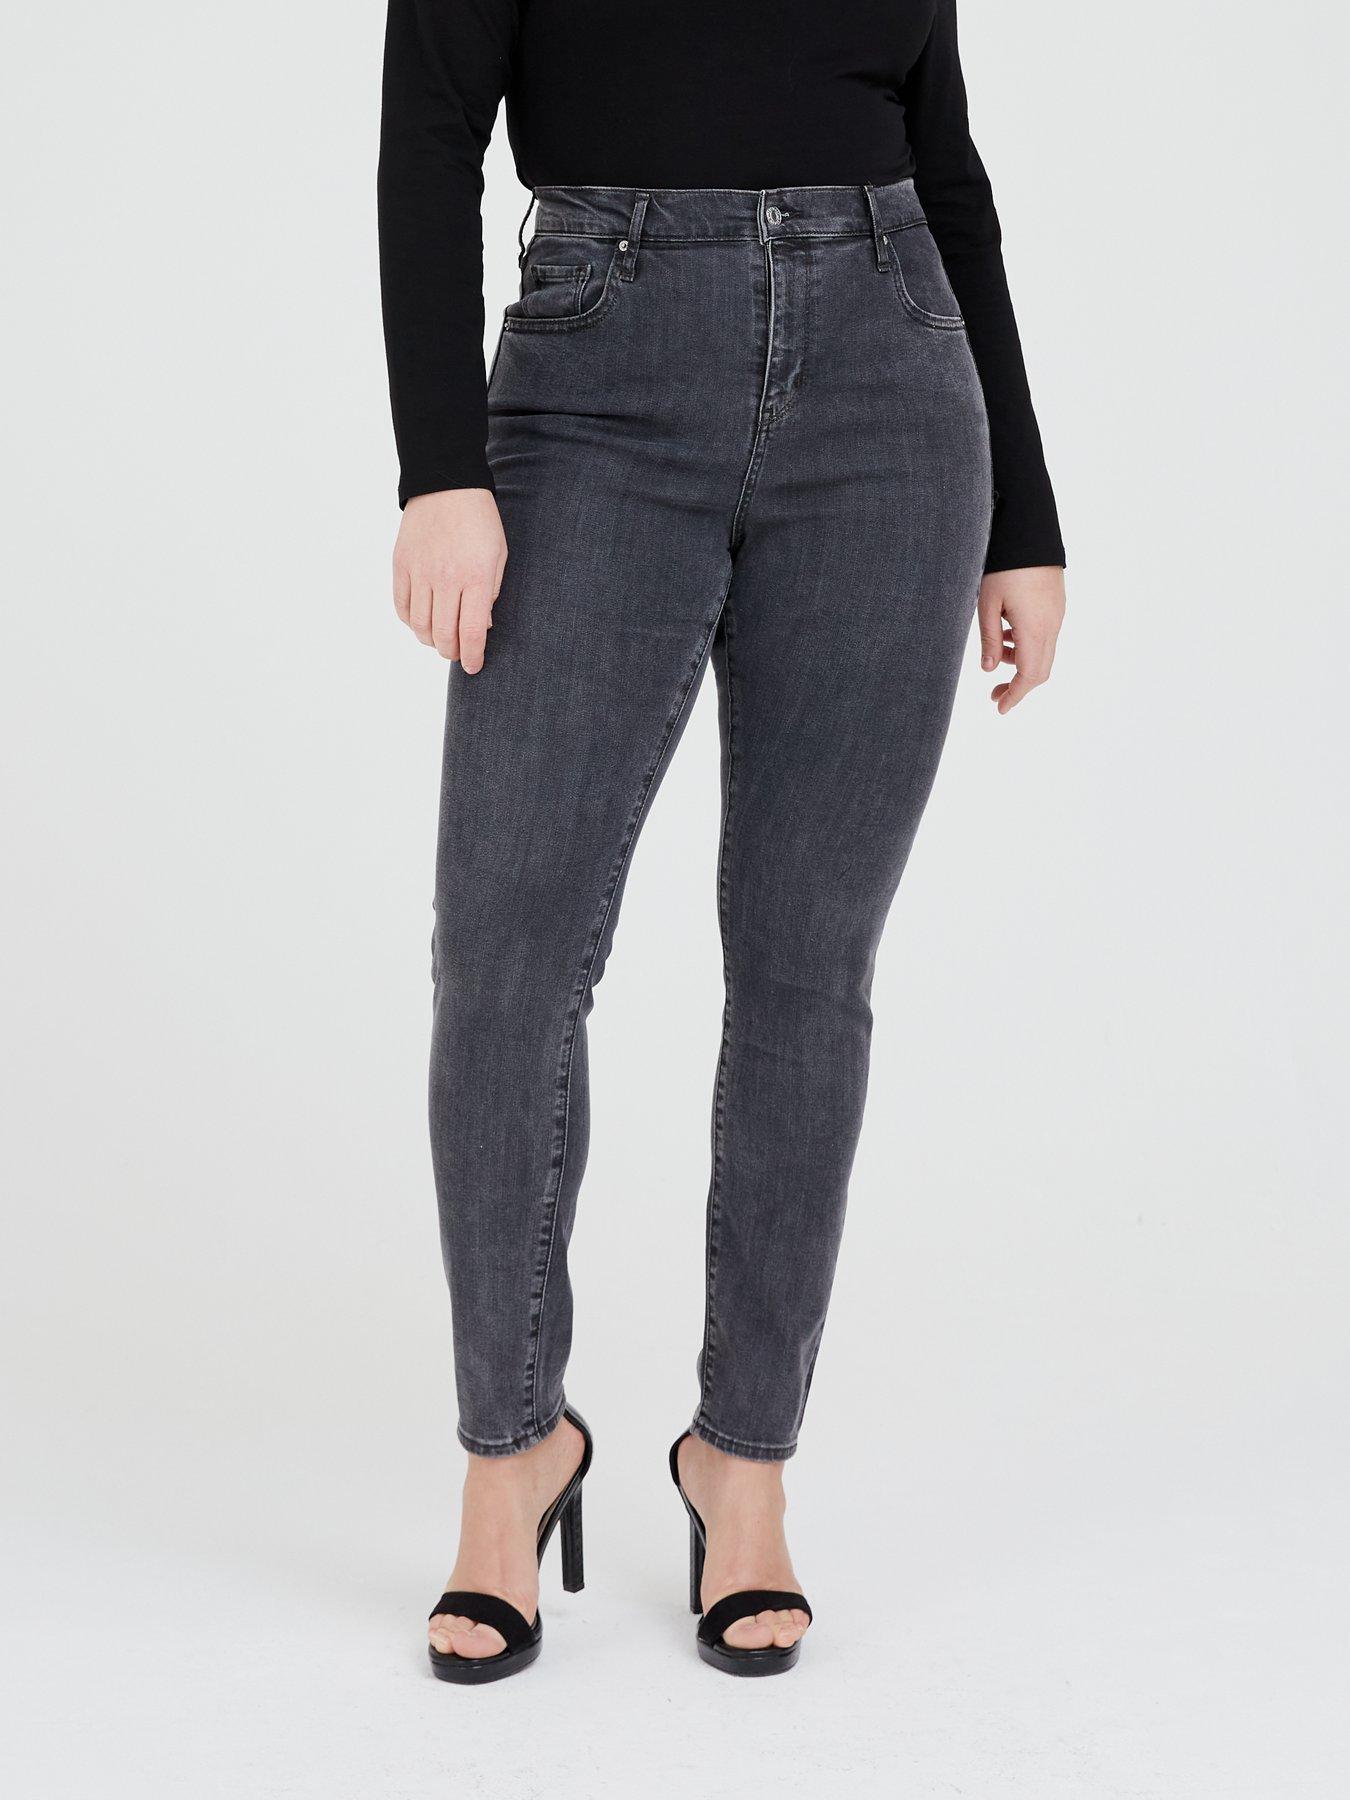 Levi's 271 High Rise Skinny Finland, SAVE 57% 